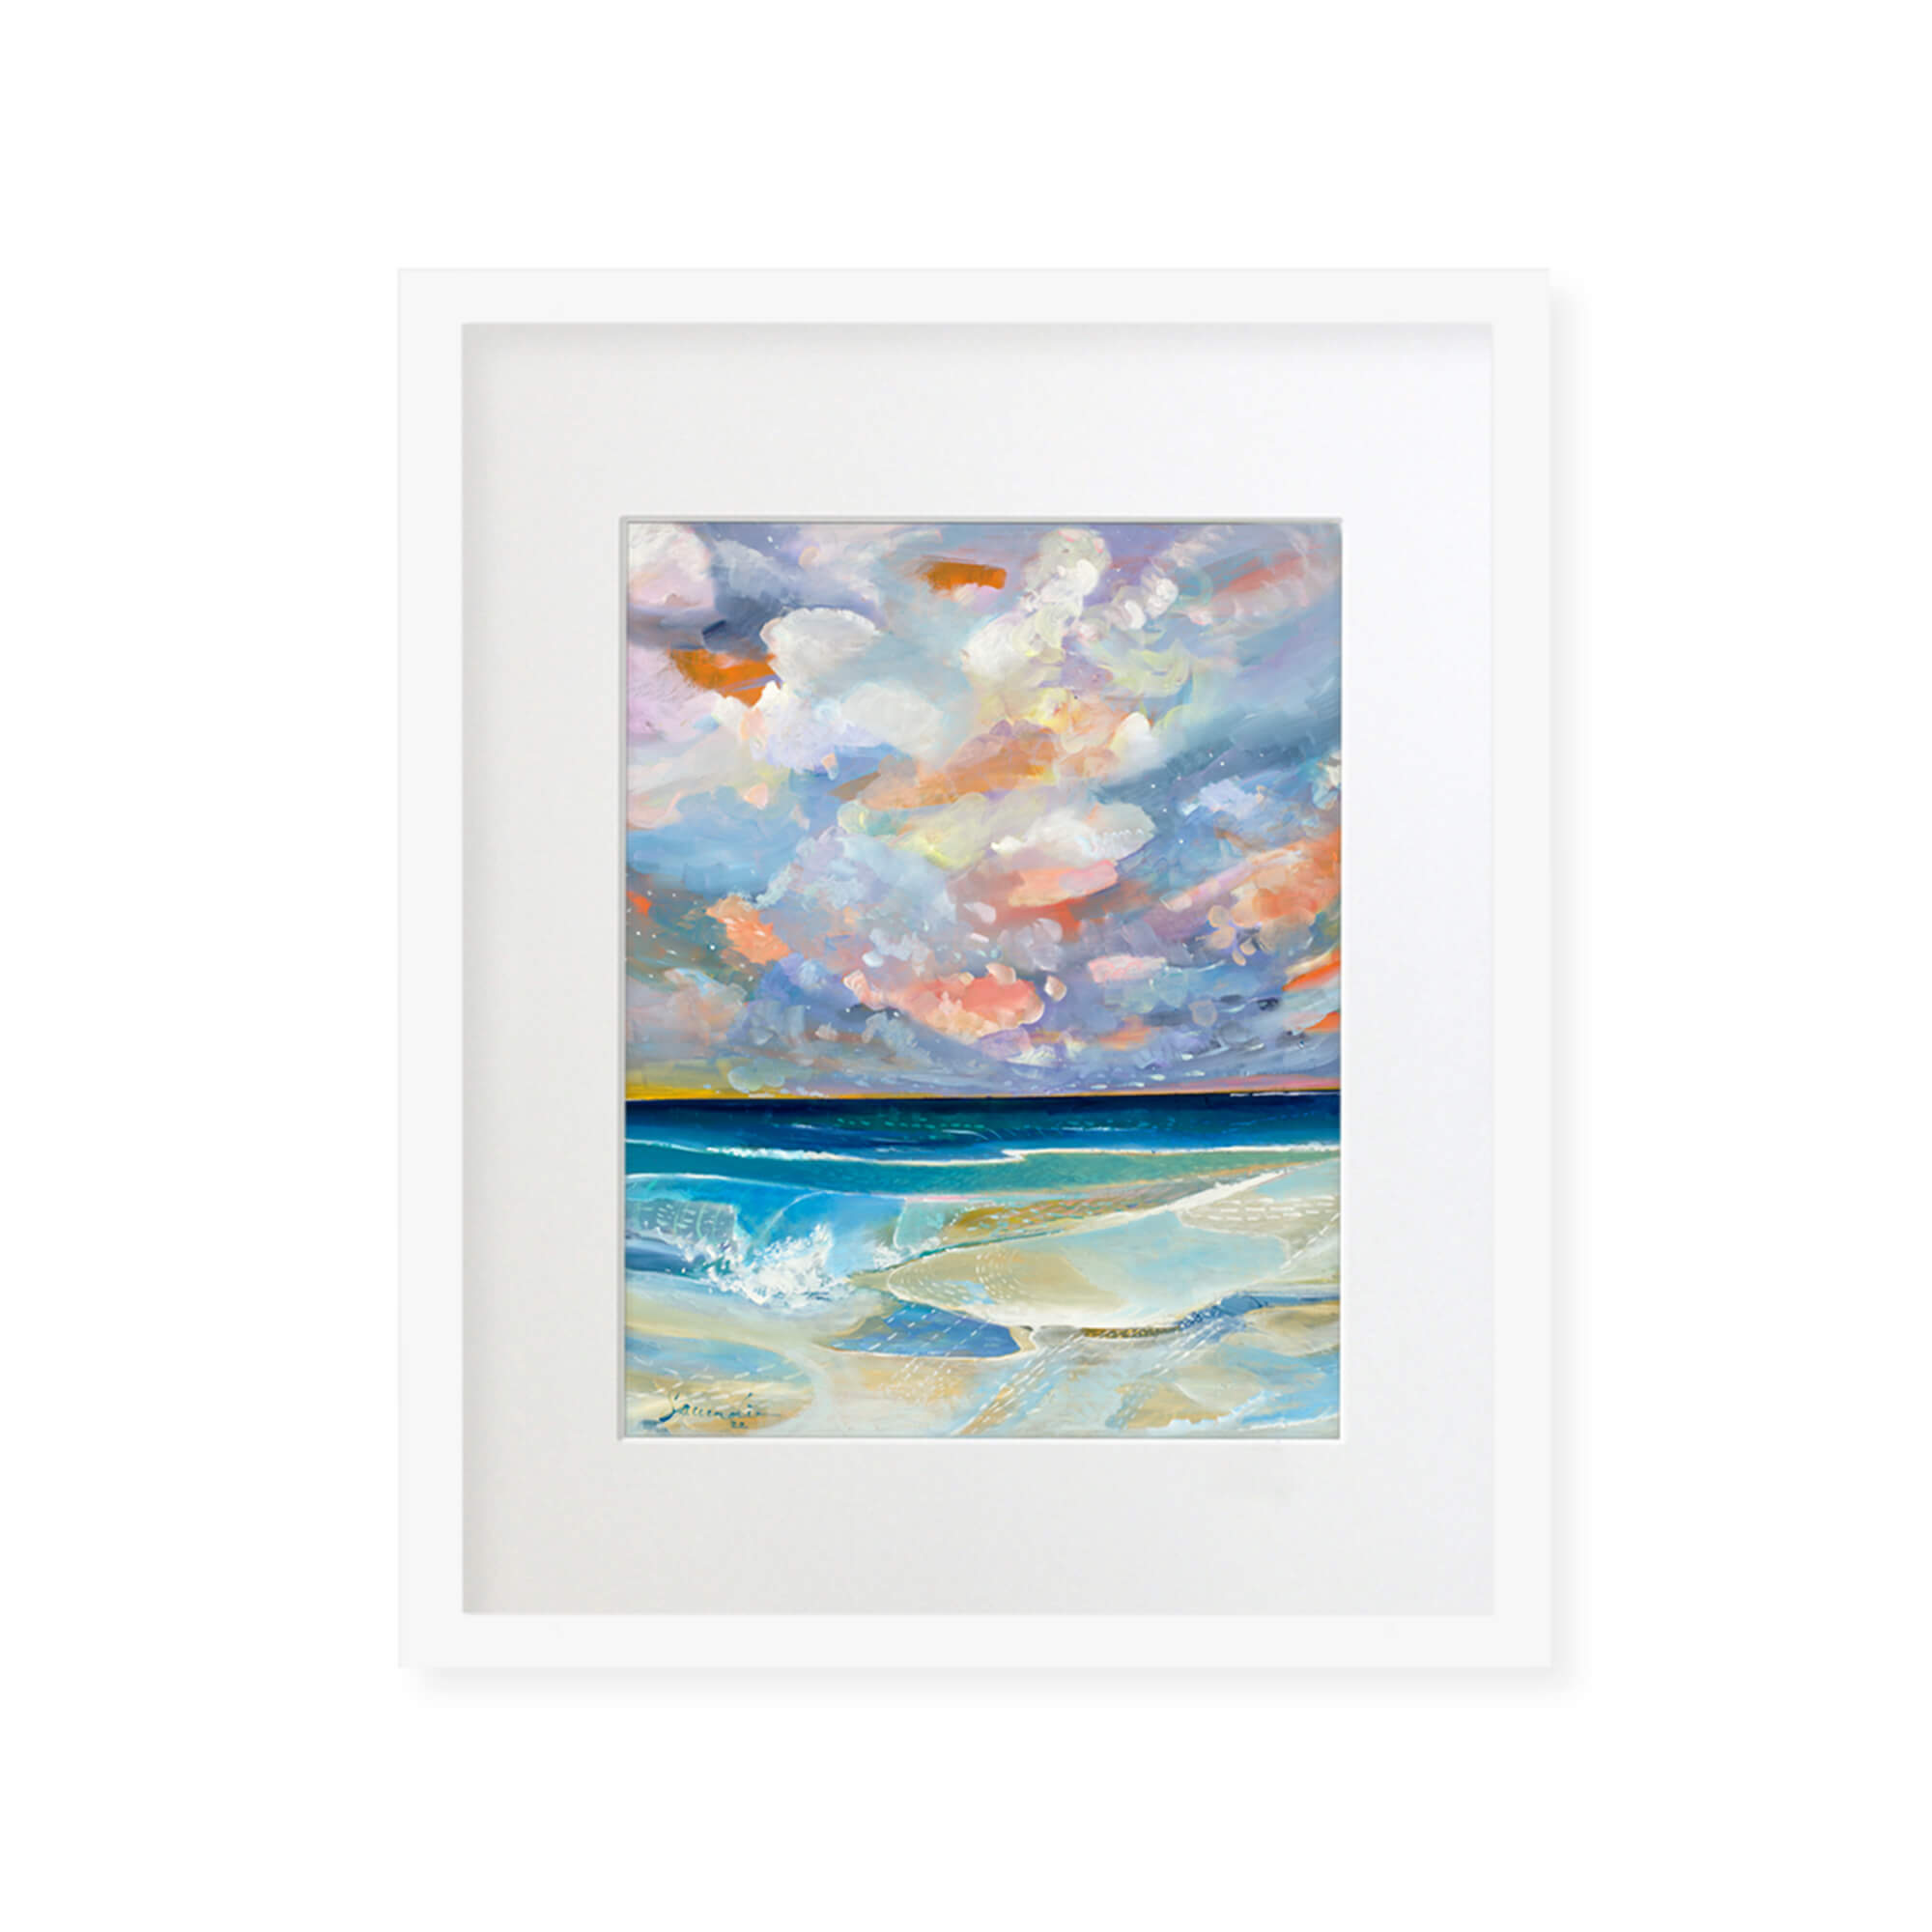 A framed matted art print featuring abstract teal and blue tinted waves crashing towards the shore by popular Hawaii artist Saumolia Puapuaga